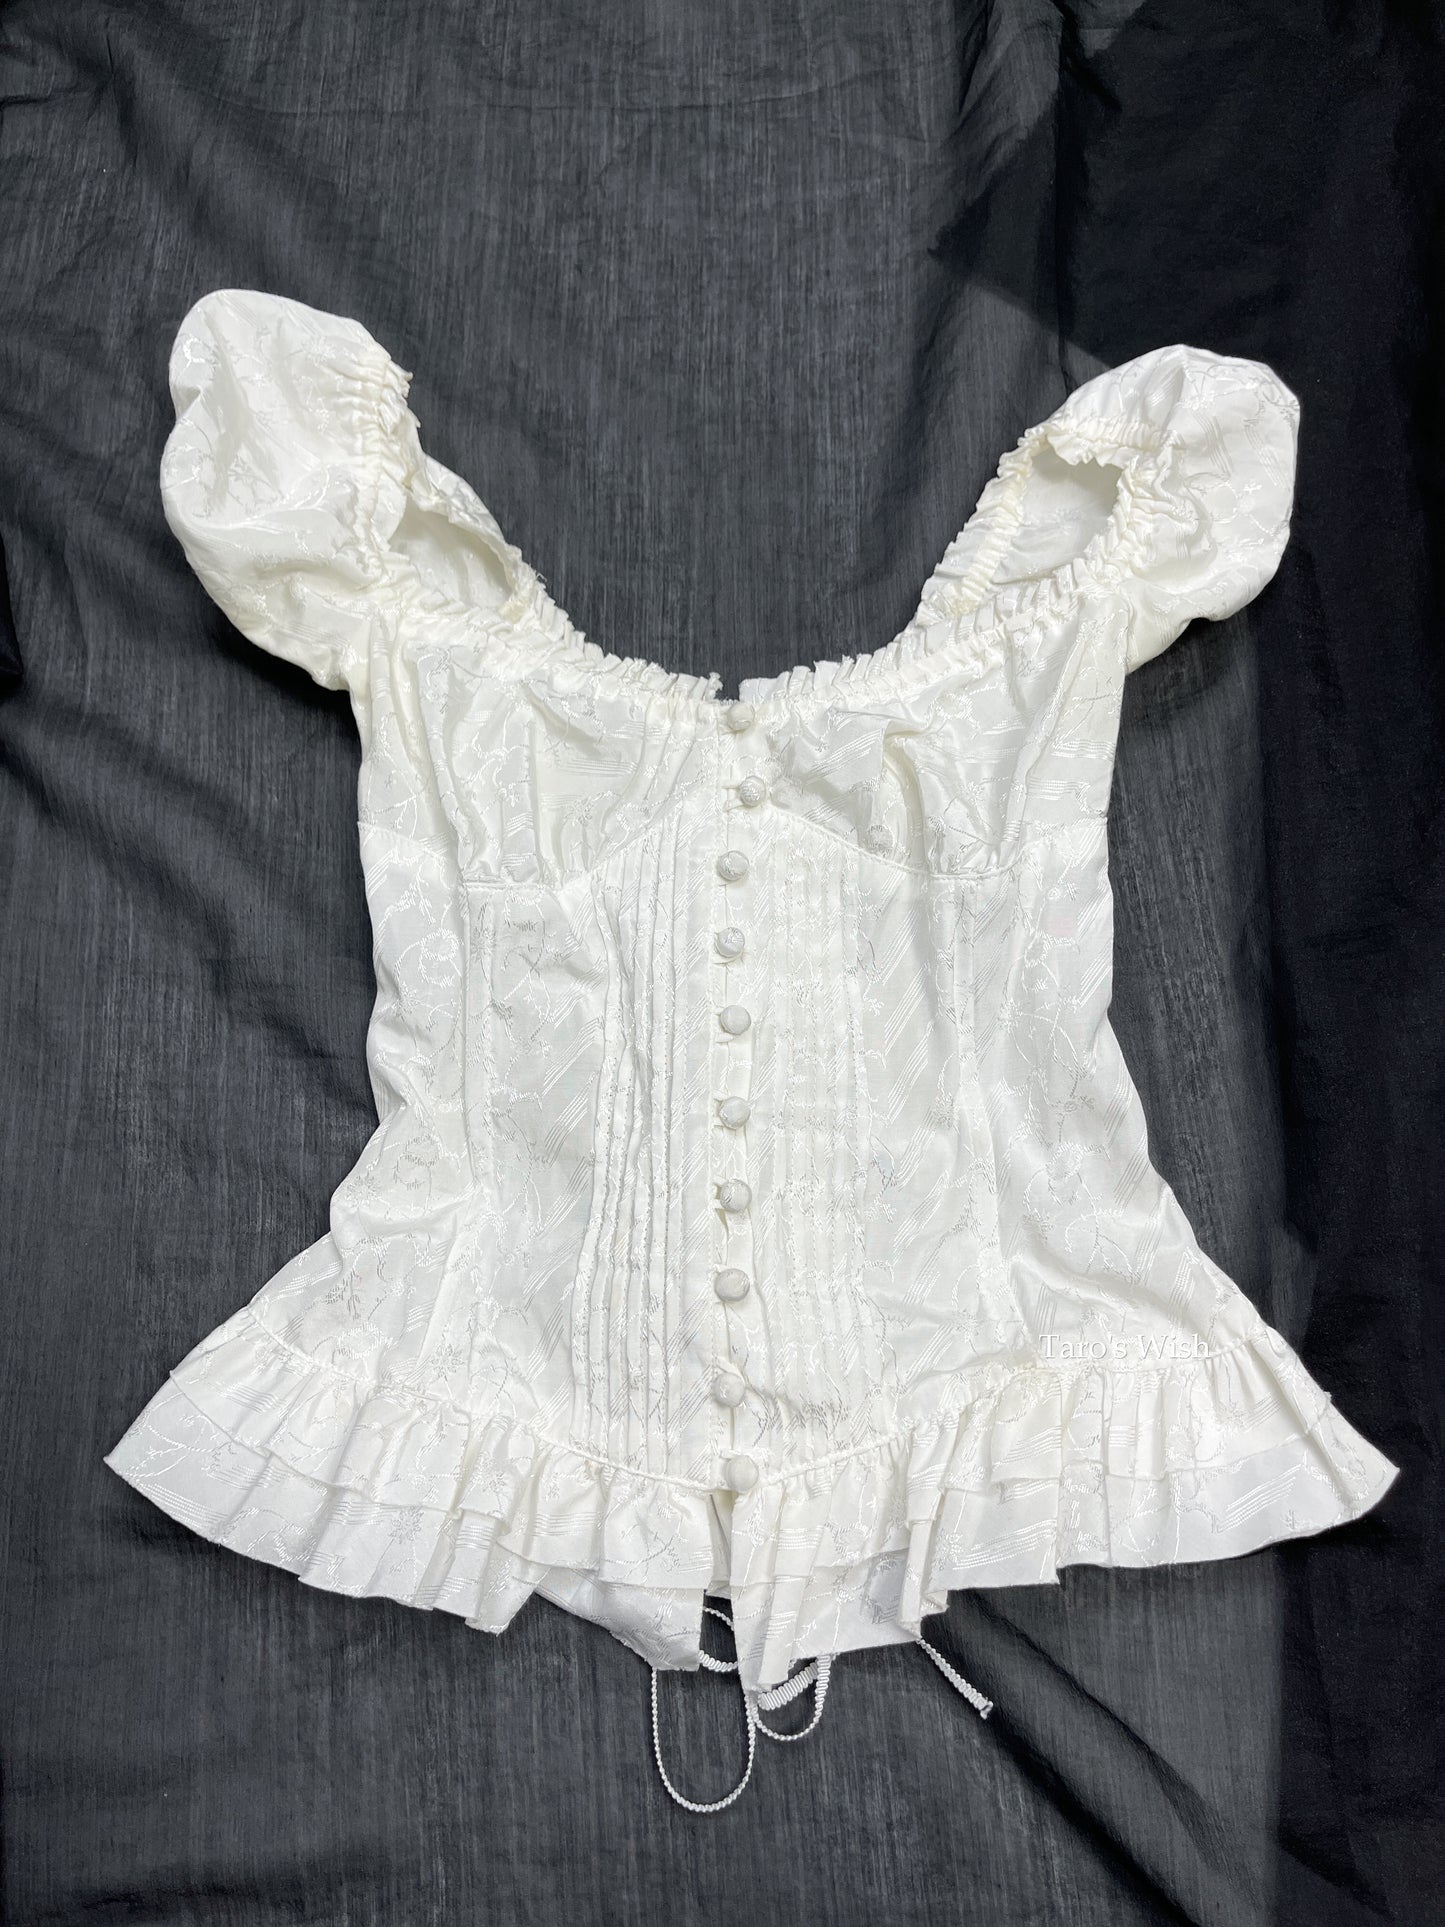 Double Standard Clothing Milkmaid Lace Up Corset Top